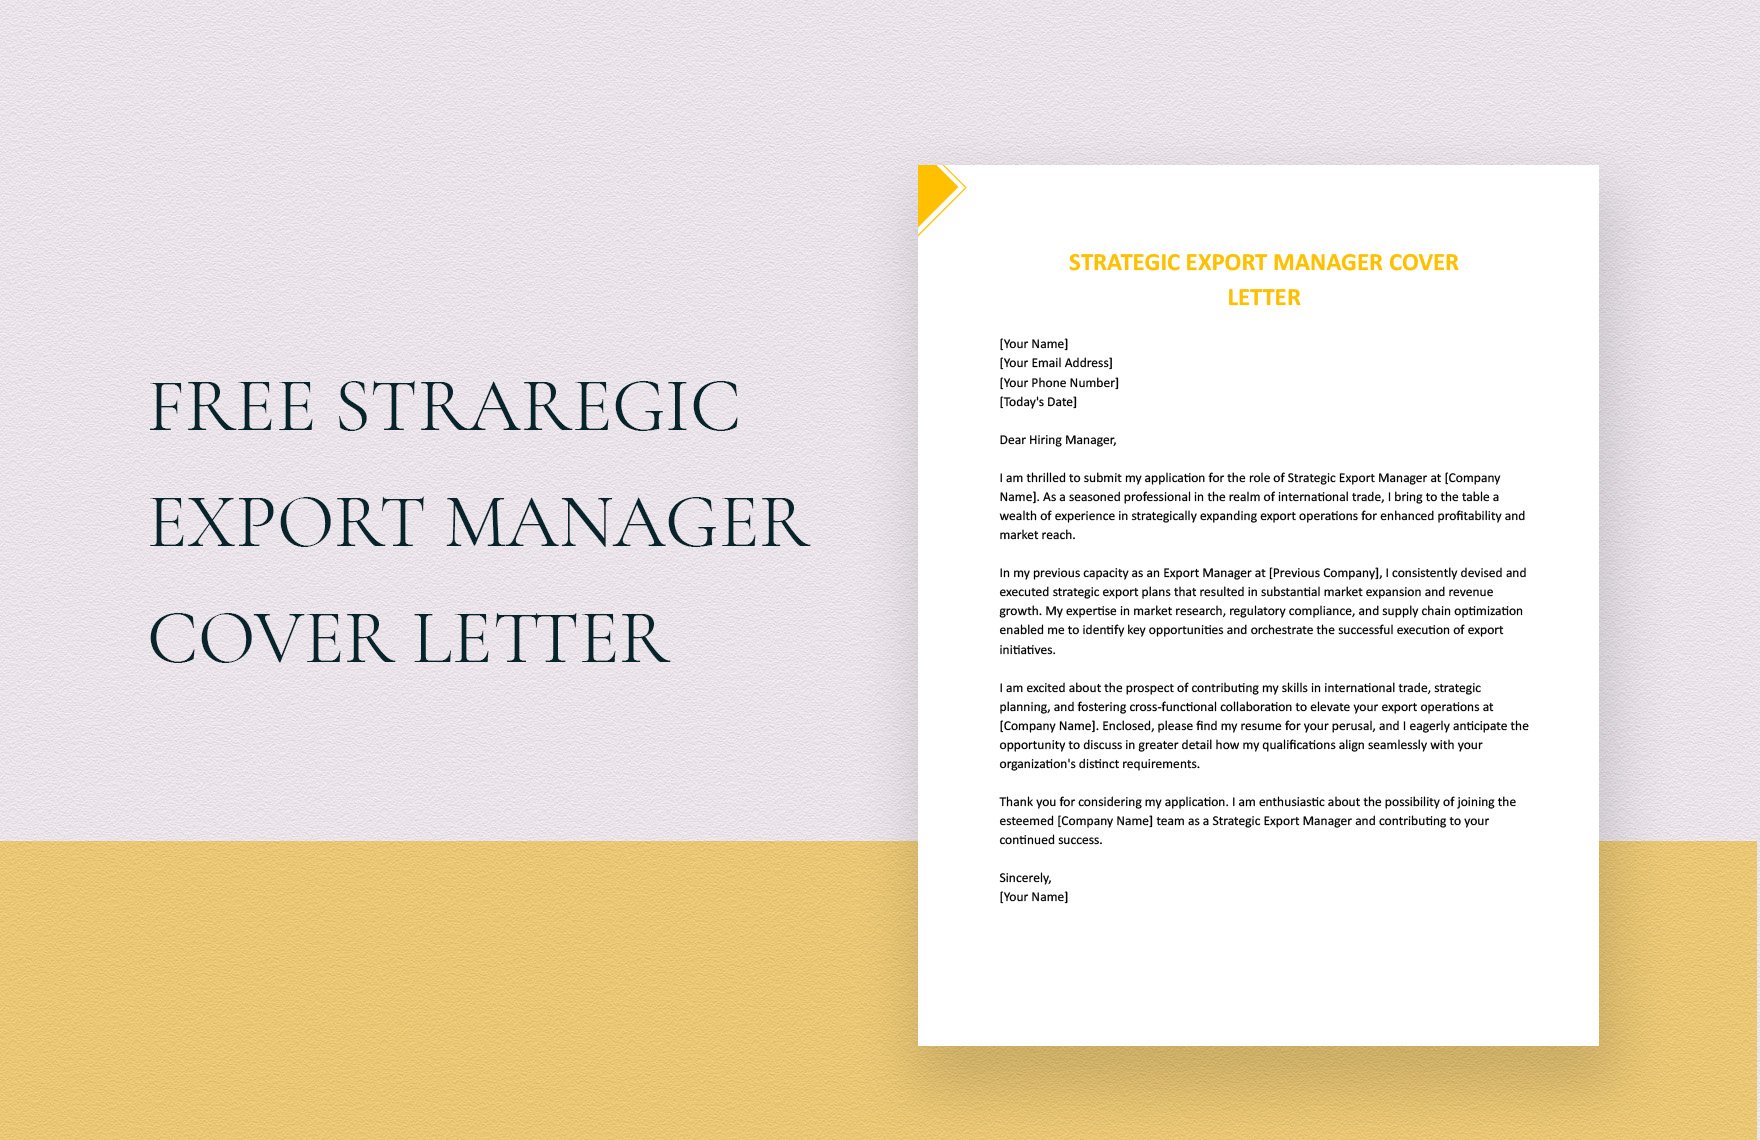 Strategic Export Manager Cover Letter in Word, Google Docs